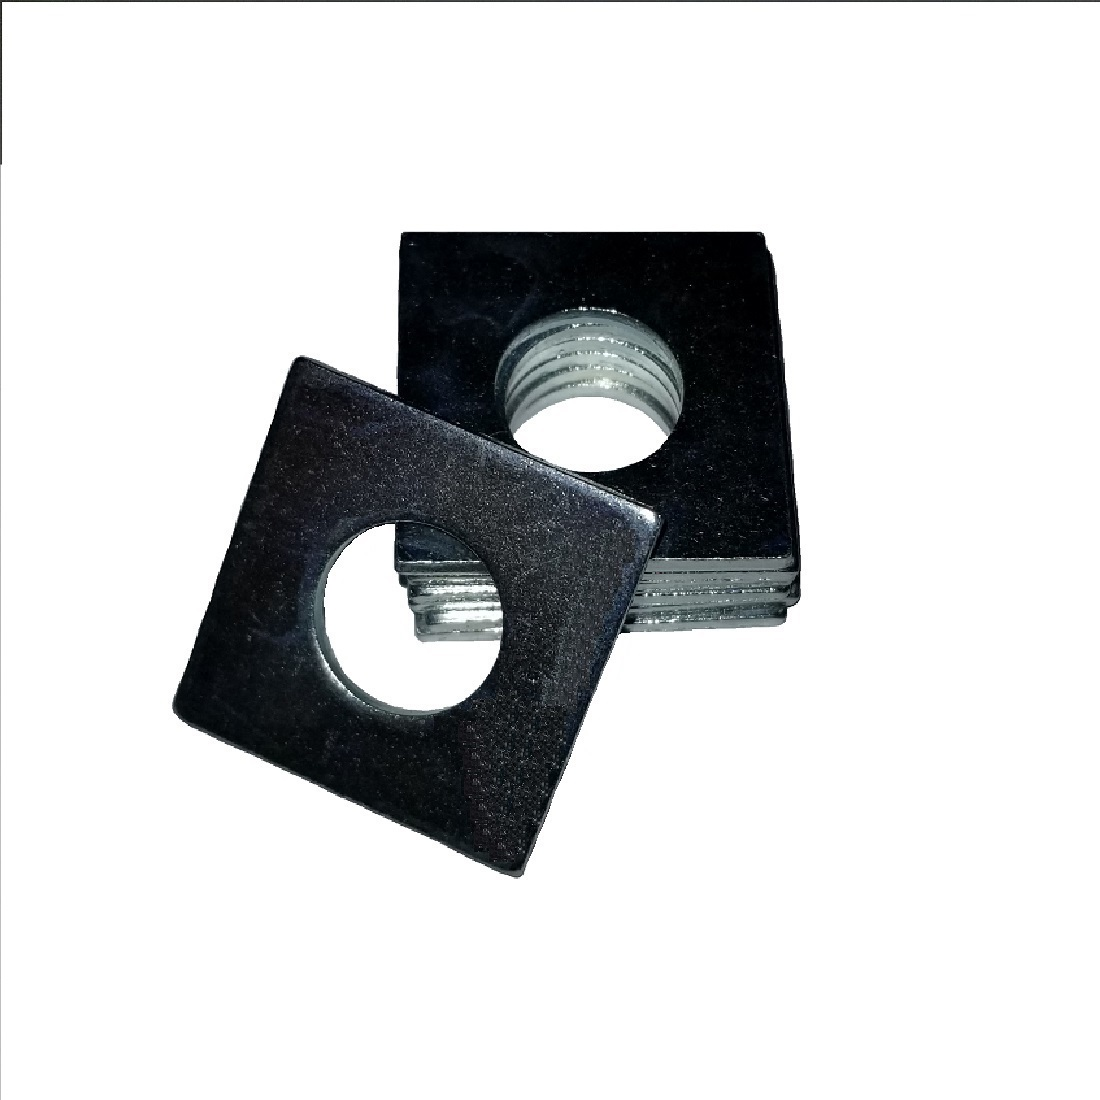 Square OD Washer - 0.875 ID, 2.000 OD, 0.125 Thick, Spring Steel - Hard